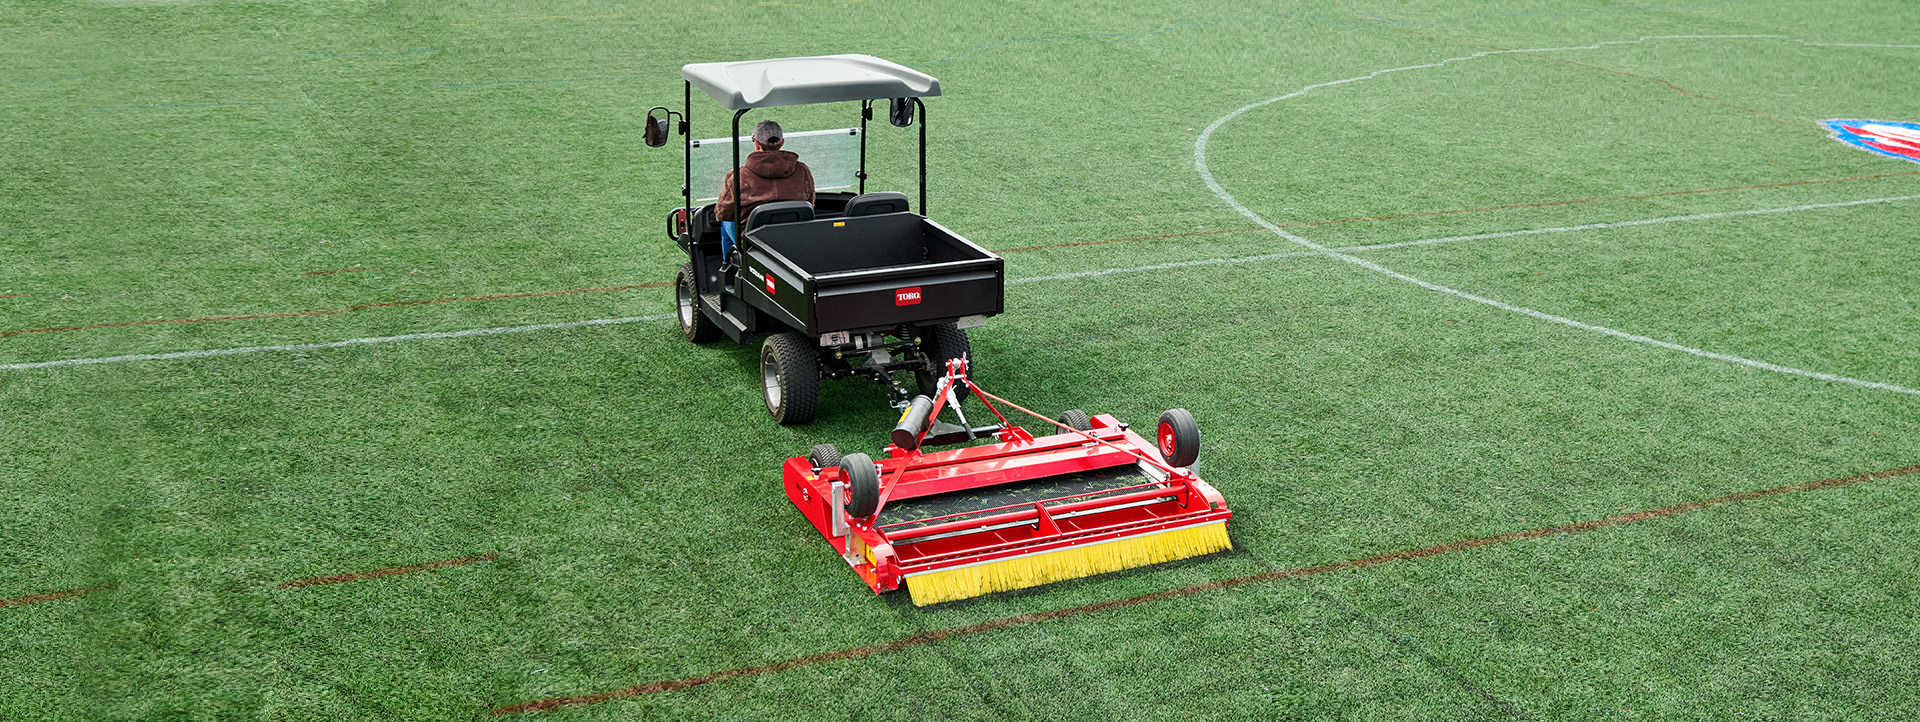 Synthetic Turf Grooming, Cleaning and Decompacting Products